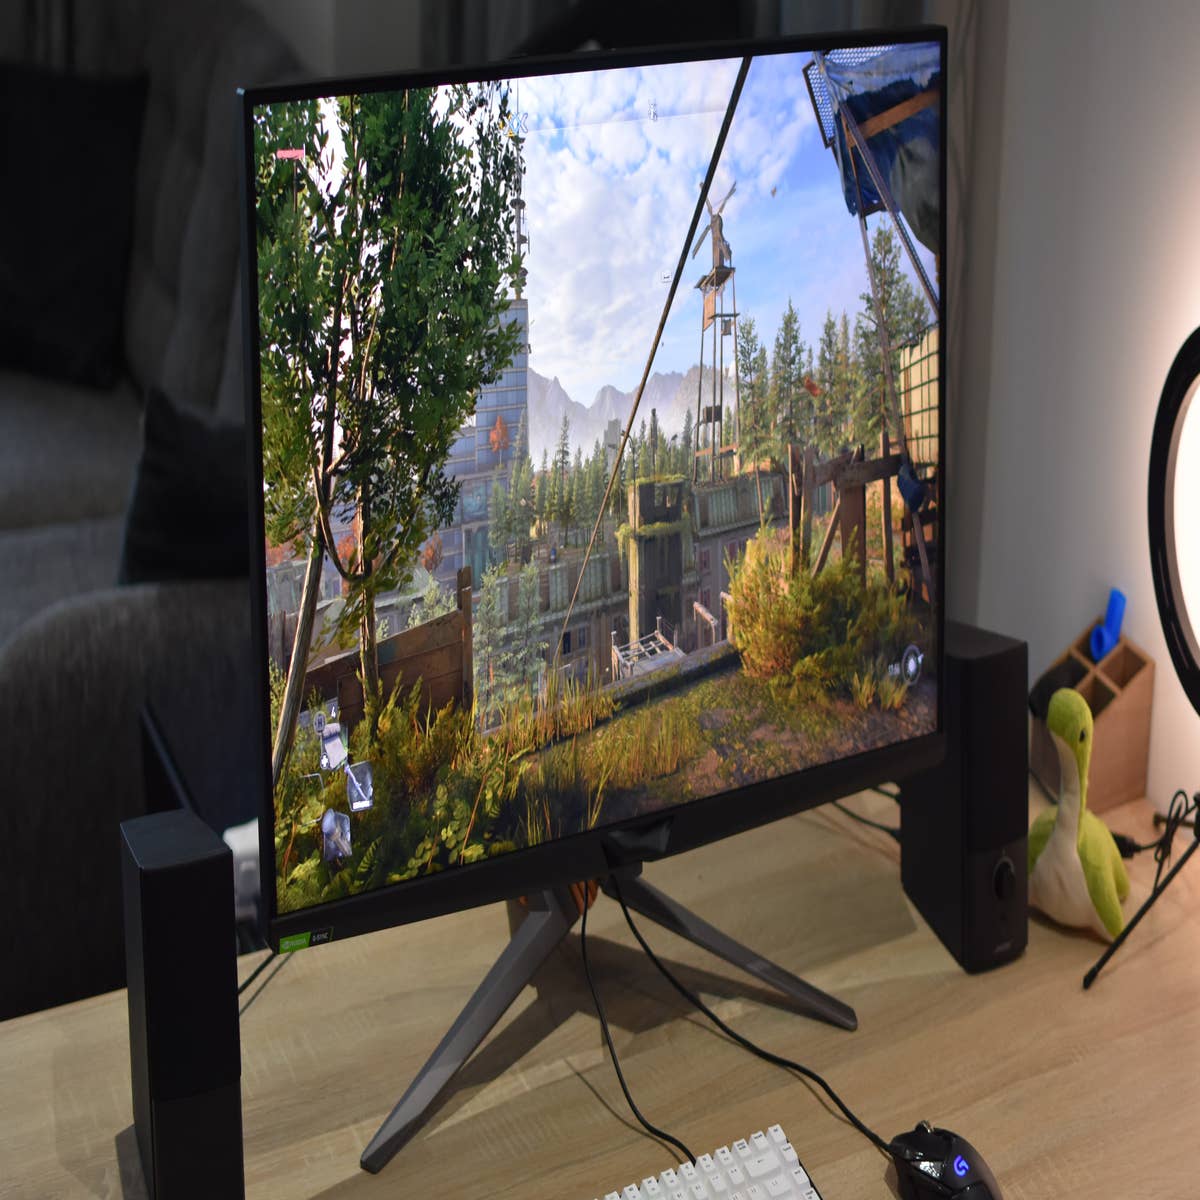 Asus' HDMI 2.1 Gaming Monitors Come In Your Size